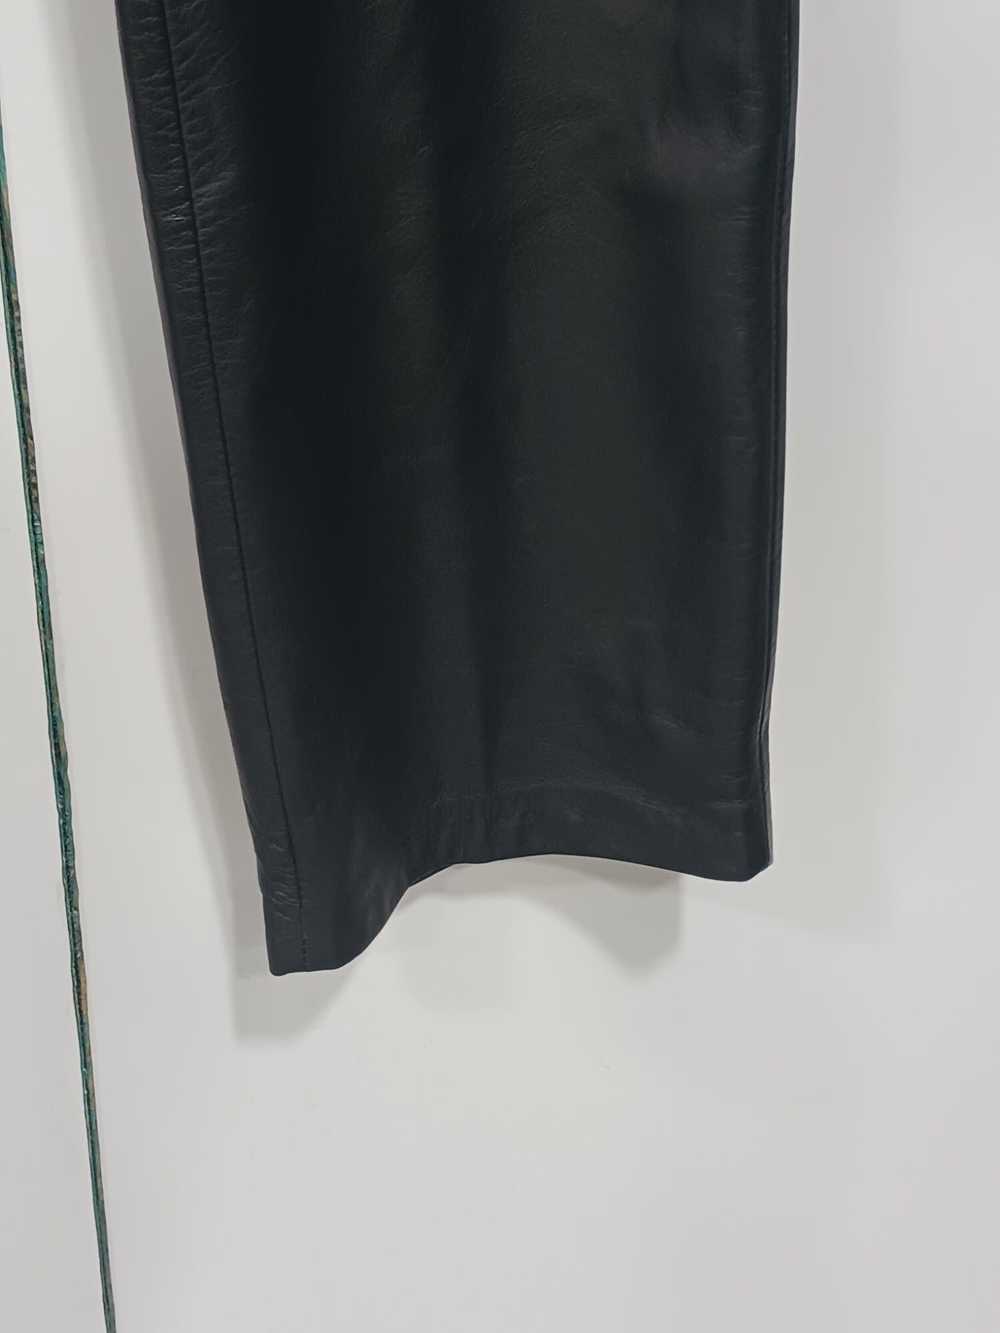 Real Clothes Women's Leather Pants Size 14 - image 3